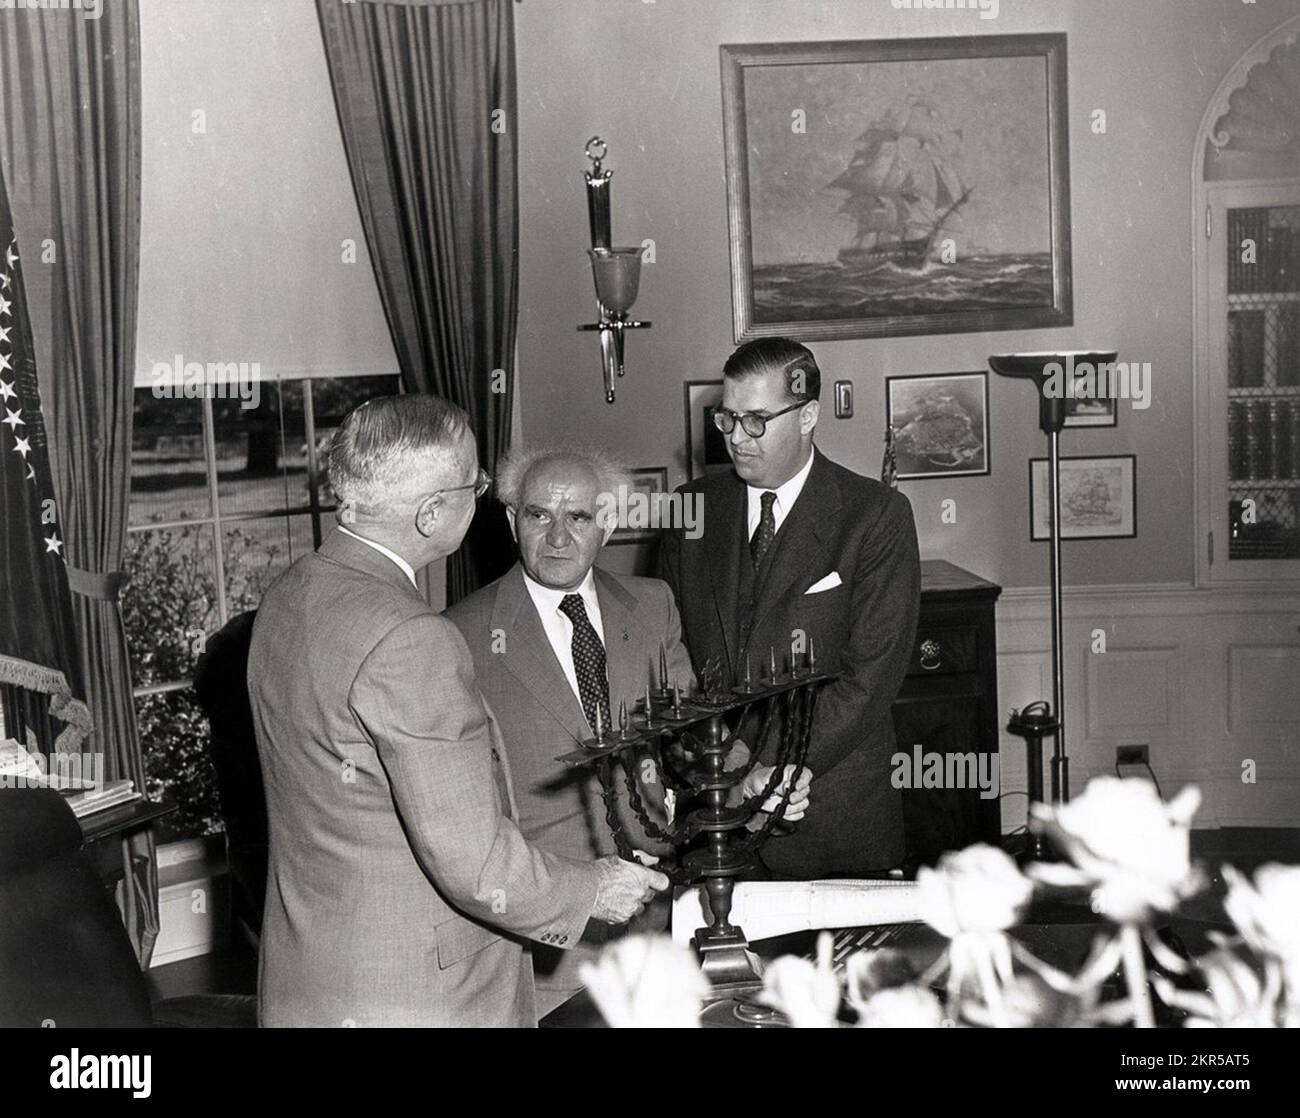 Truman in the Oval Office, receiving a Hanukkah Menorah from the prime minister of Israel, David Ben-Gurion (center). To the right is Abba Eban, ambassador of Israel to the United States. Stock Photo